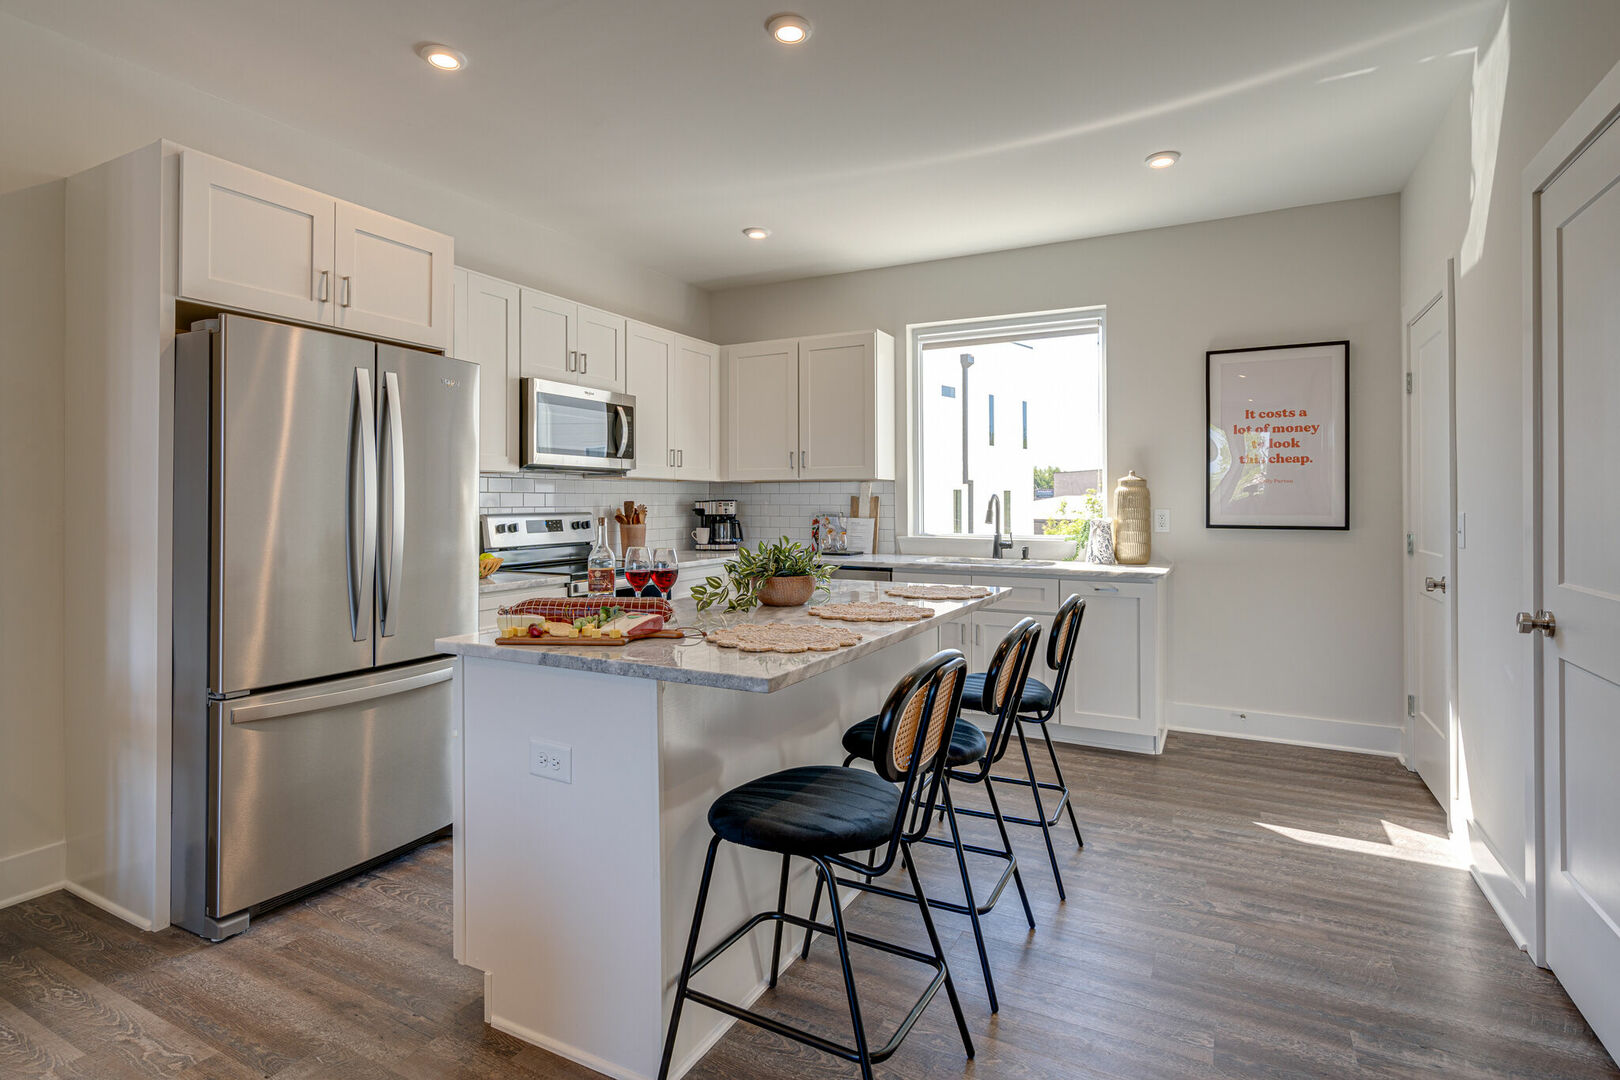 4th Unit, 2nd Floor: Open kitchen with stainless steel appliances, large island, breakfast bar seating, and is fully equipped with your basic cooking essentials.